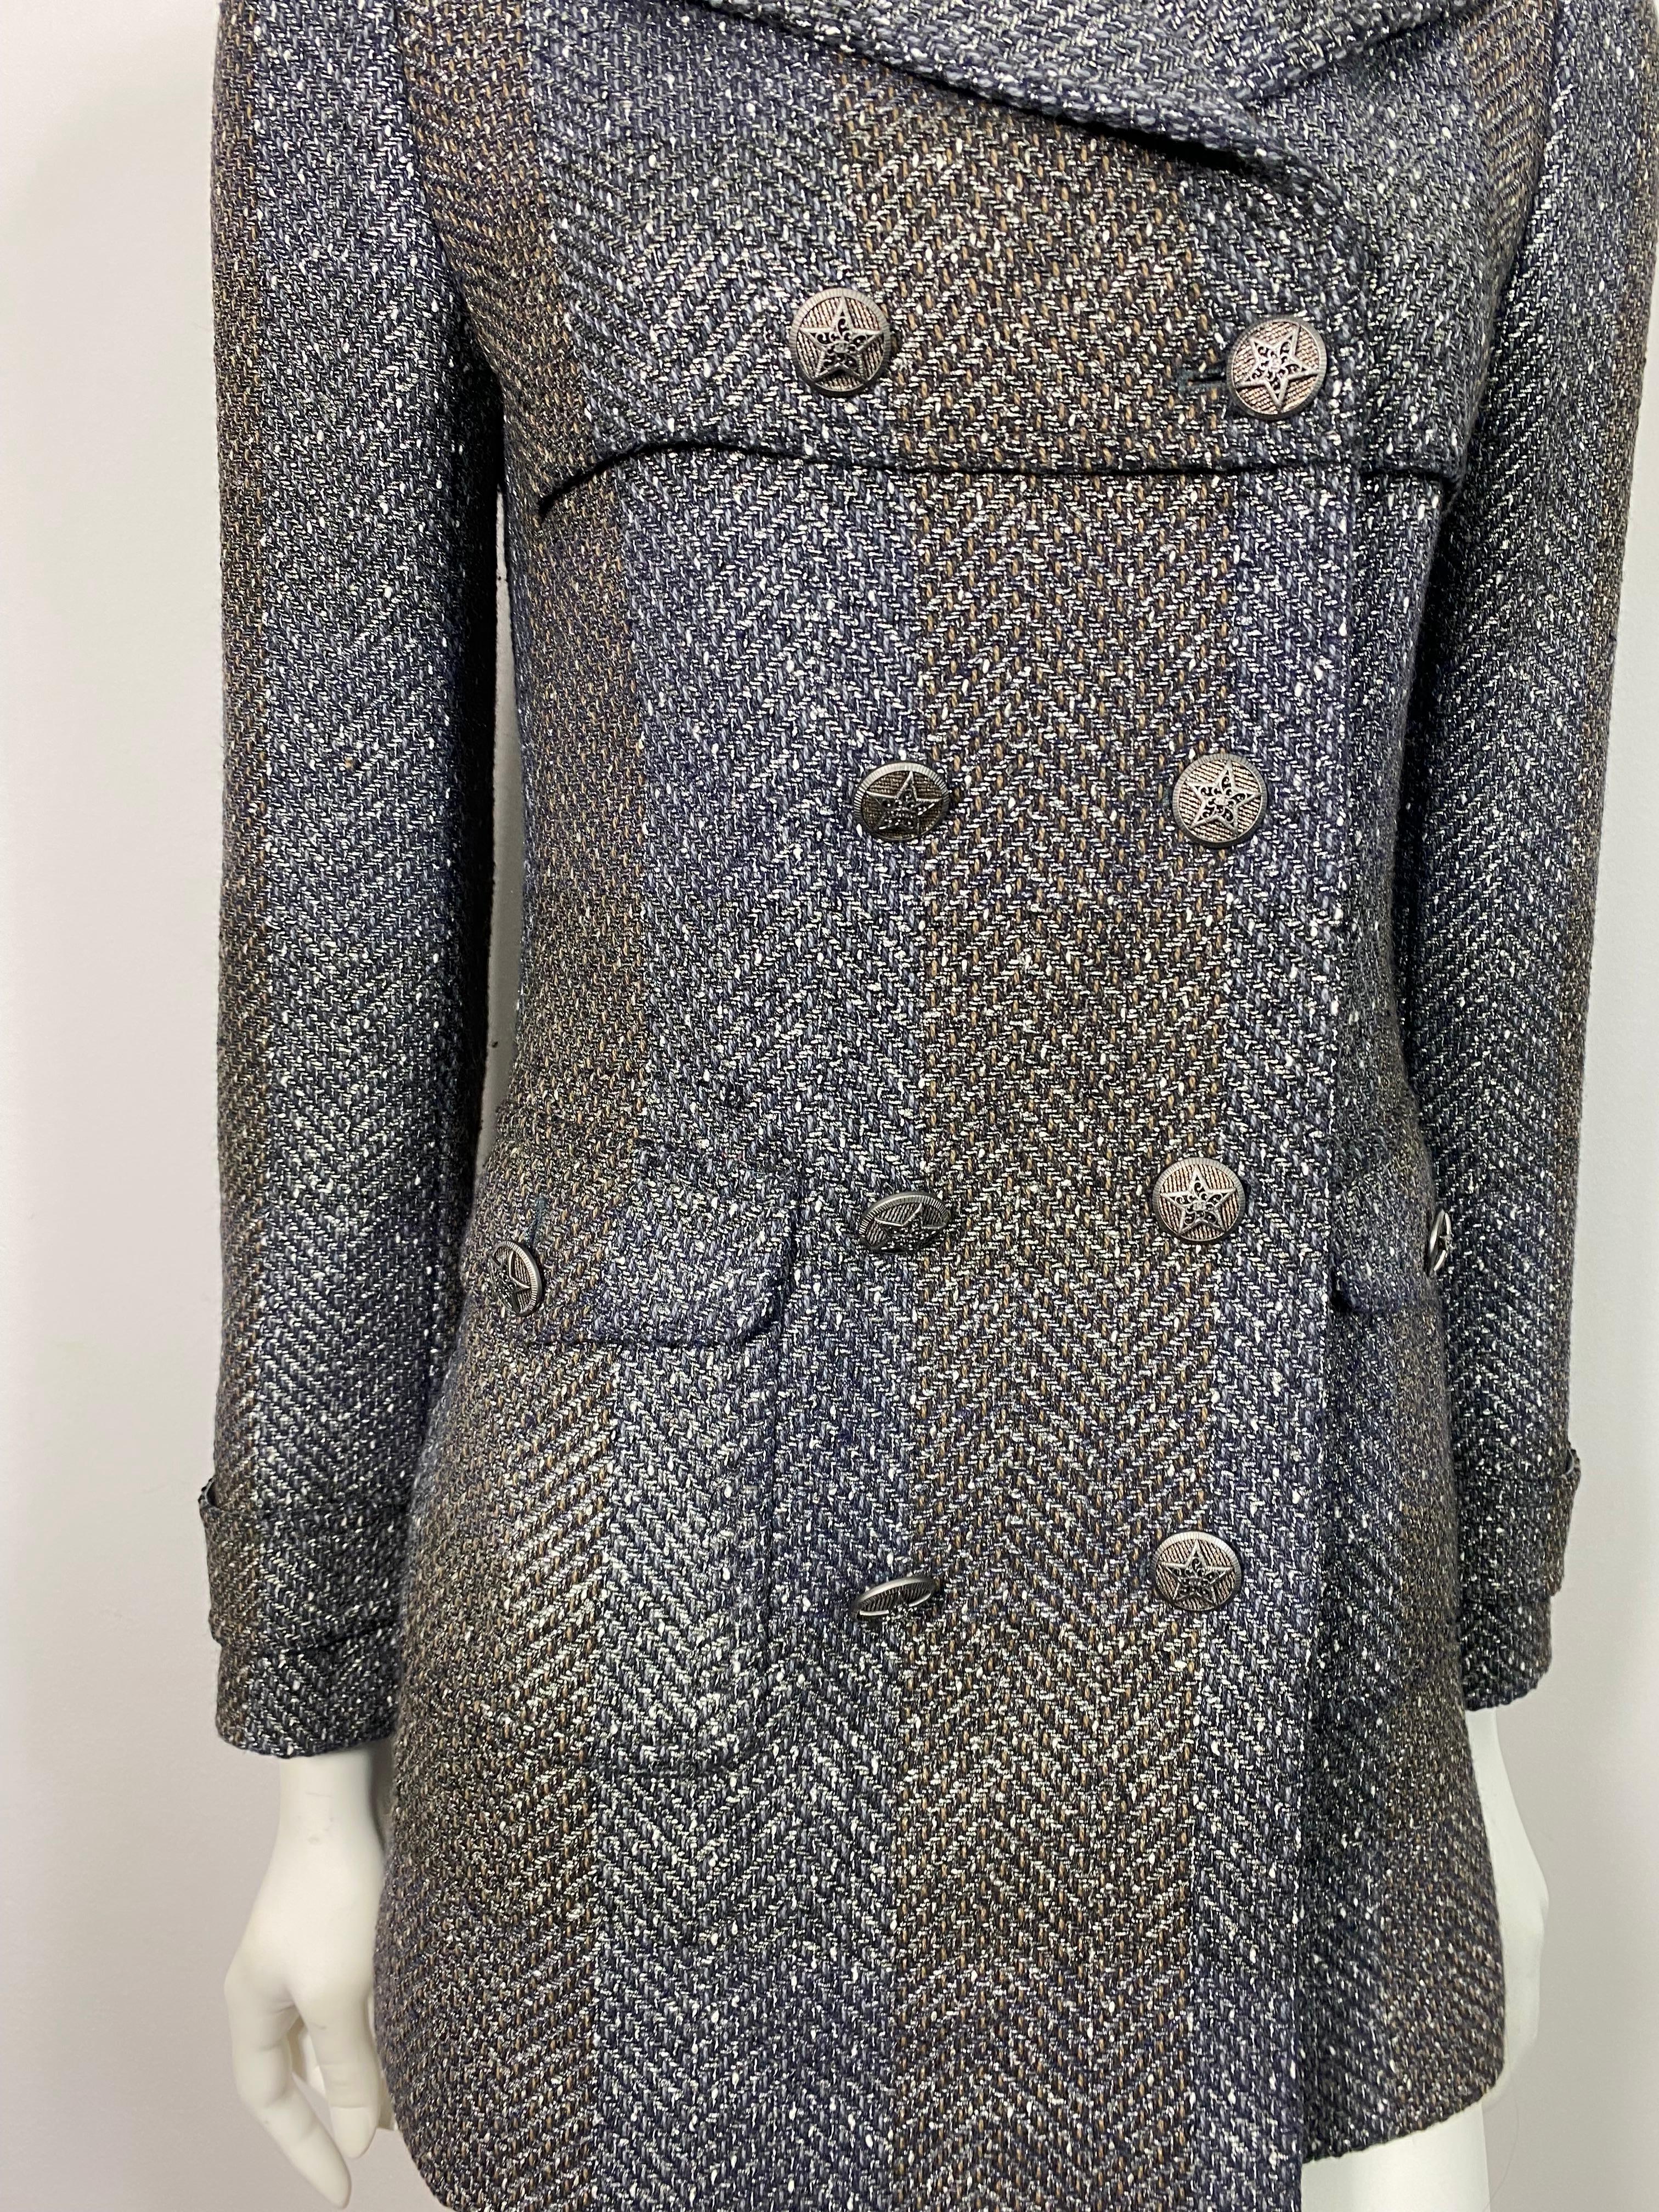 Chanel Fall 2007 Grey and Metallic Double Breasted Jacket - Size 34 In Excellent Condition For Sale In West Palm Beach, FL